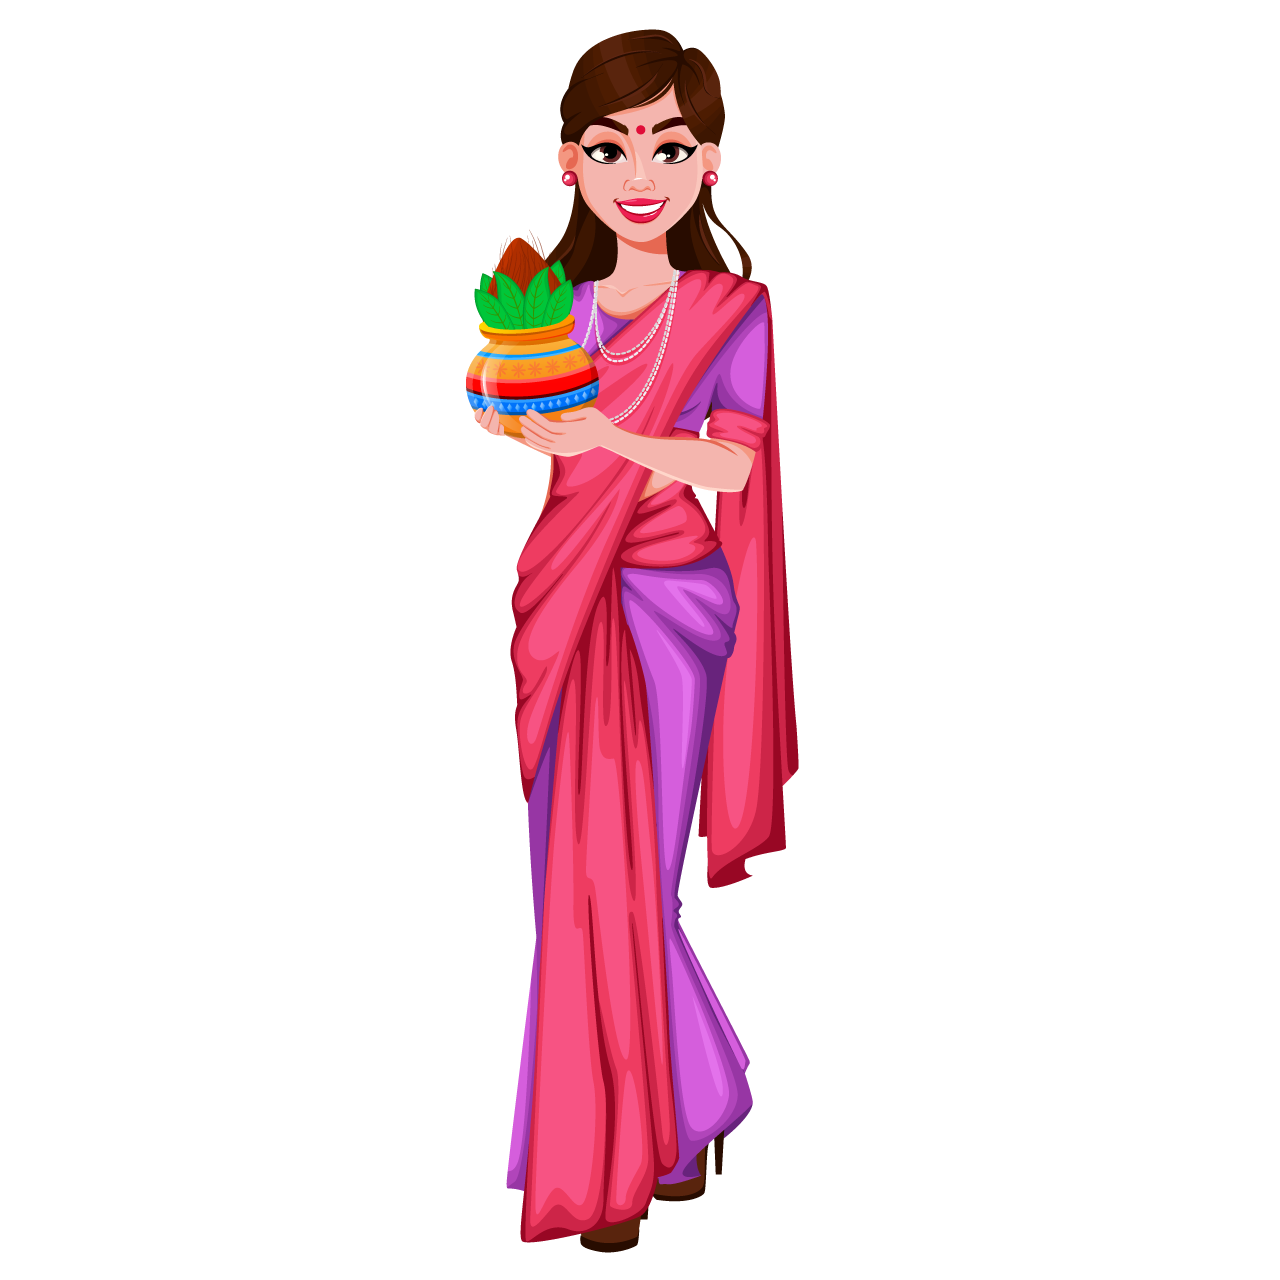 Beautiful indian bride traditional clothes cartoon illustration image